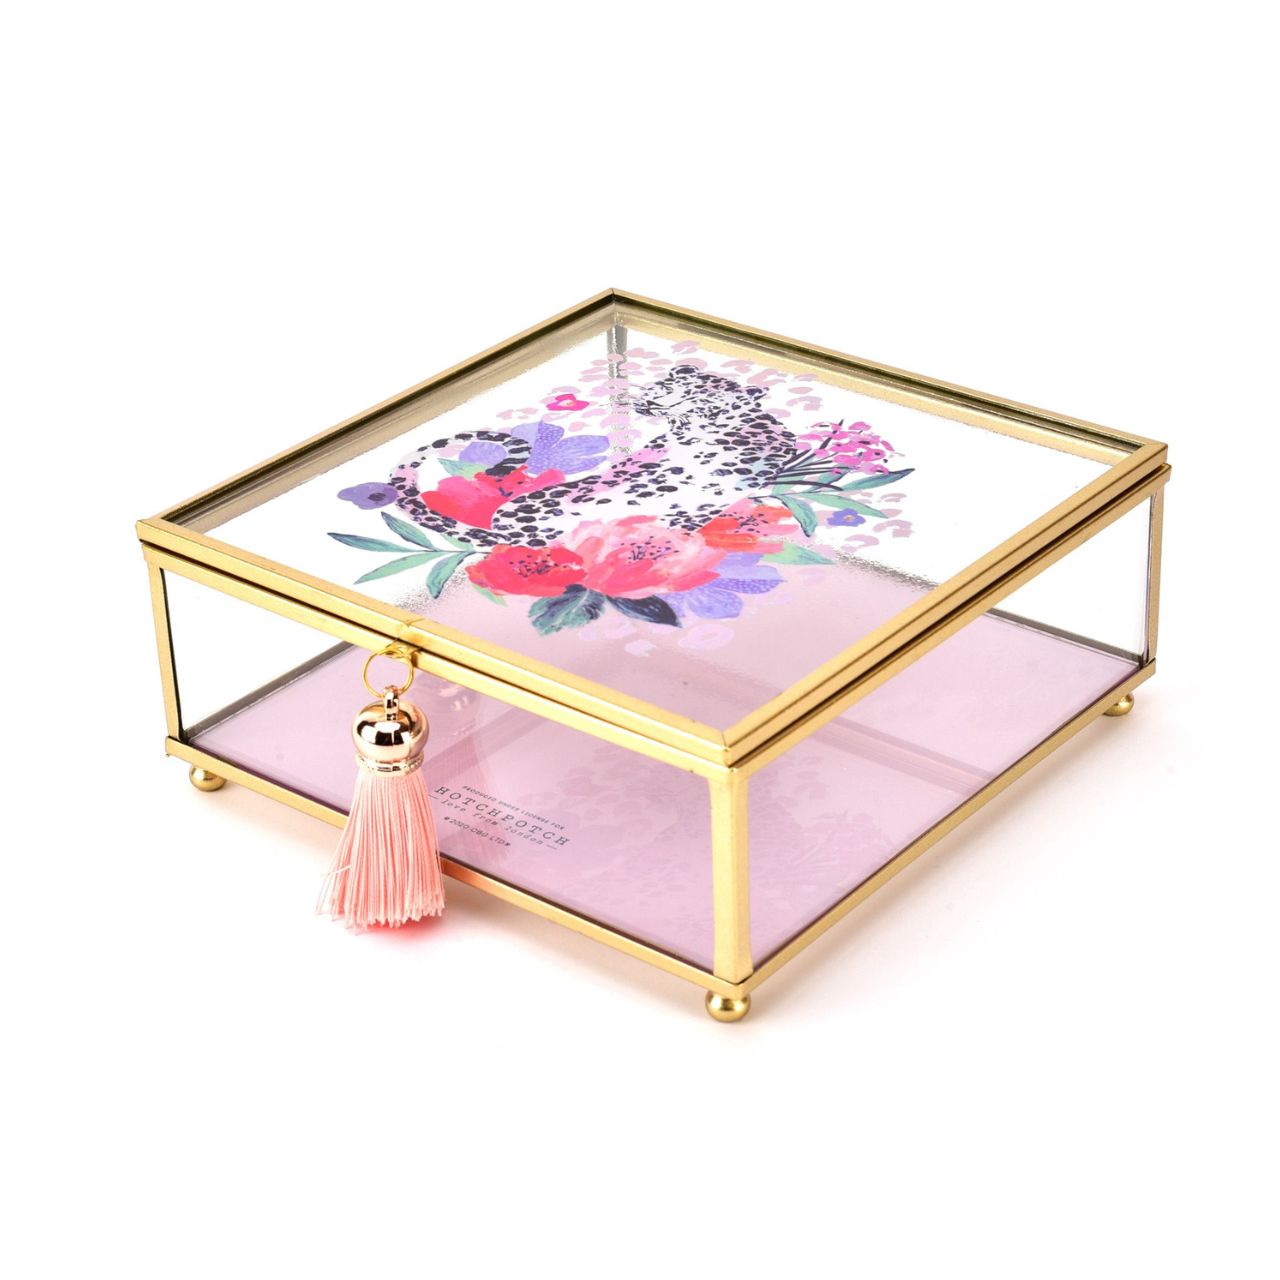 Frida Leopard Glass Trinket Box  For all your most treasured trinkets, this beautiful large glass Leopard box from our Frida collection is sure to add sophistication and style to your dressing table.